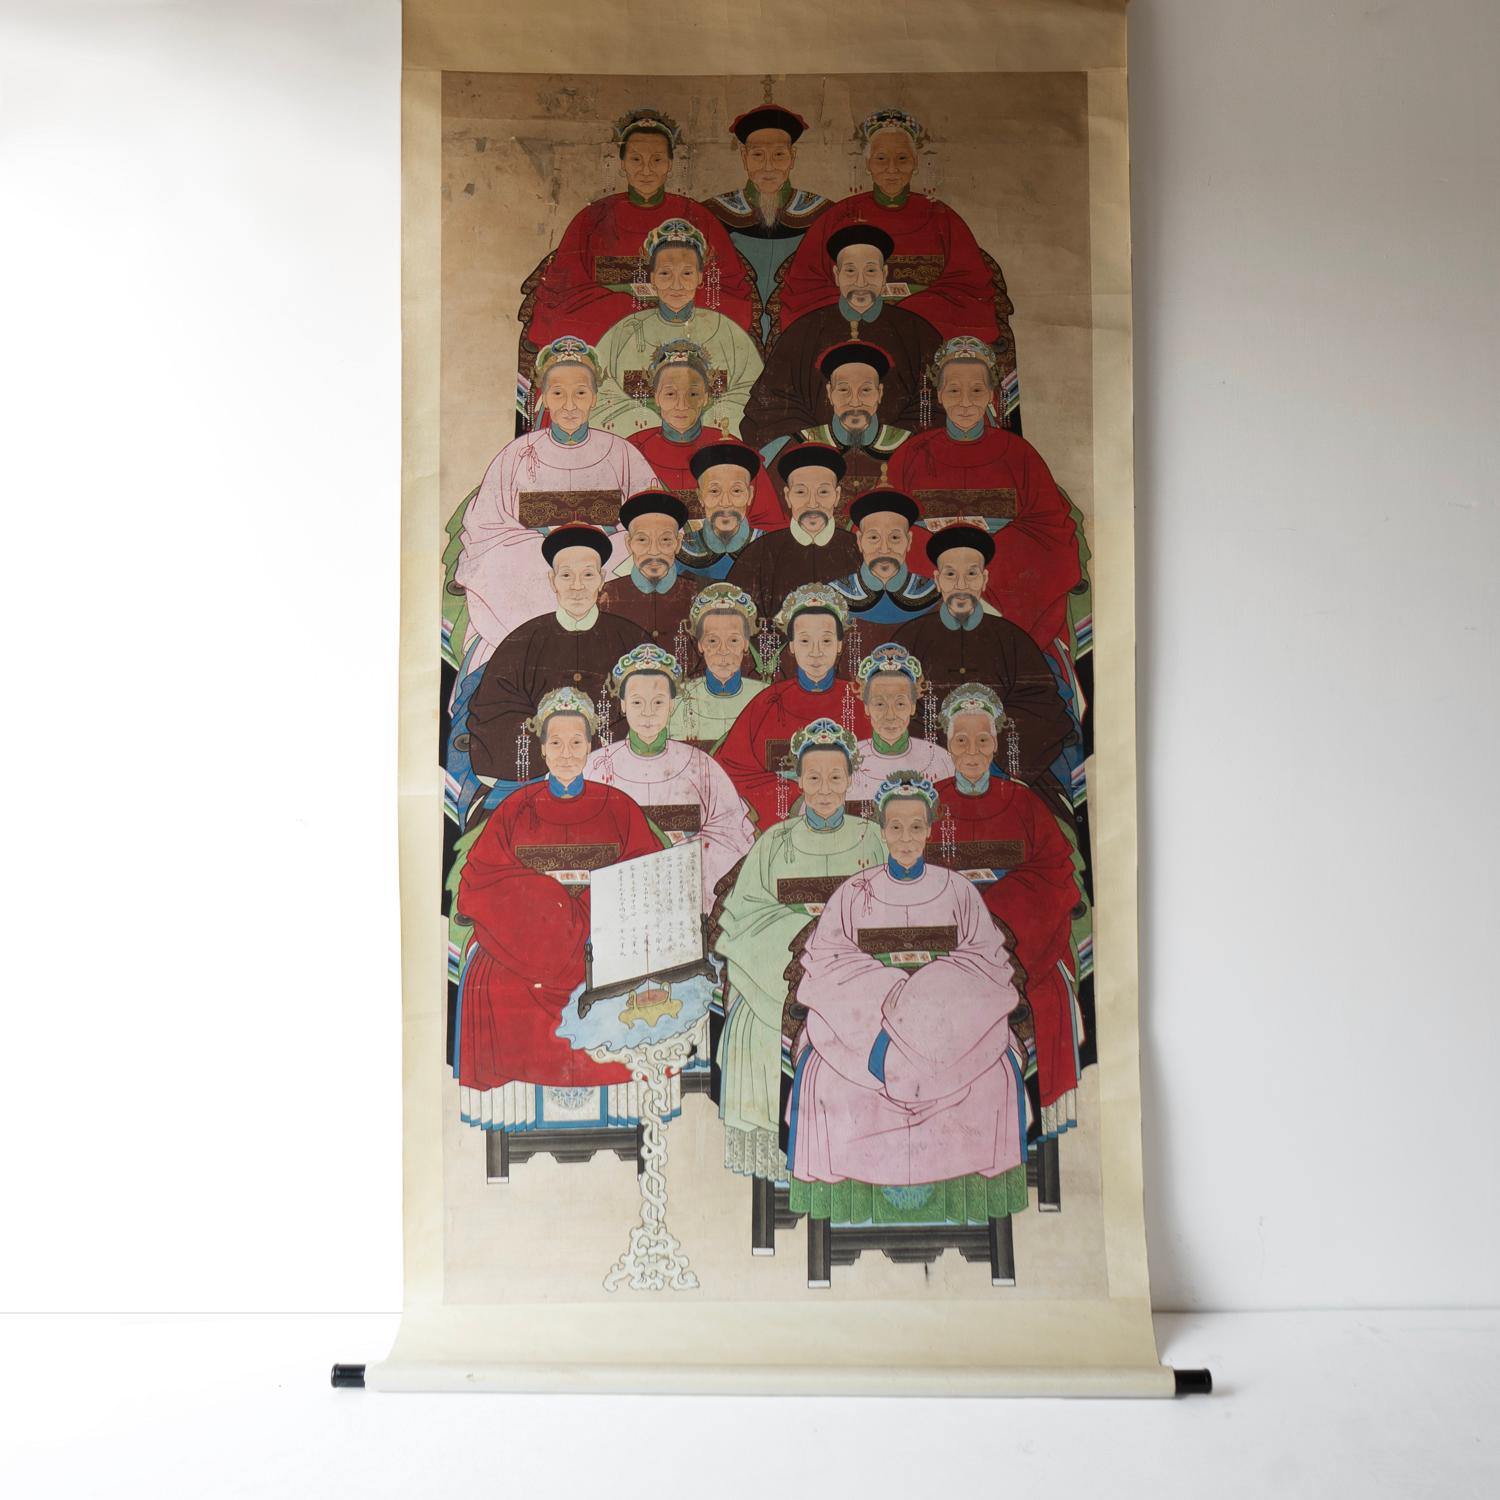 ANTIQUE CHINESE MULTI-GENERATIONAL FAMILY PORTRAIT, ORIGINAL ANCESTRAL PORTRAIT PAINTING, 19TH CENTURY

Dating from the late Qing Dynasty (19th century).

Large-scale ancestor painting depicting at least six generations of a noble Chinese